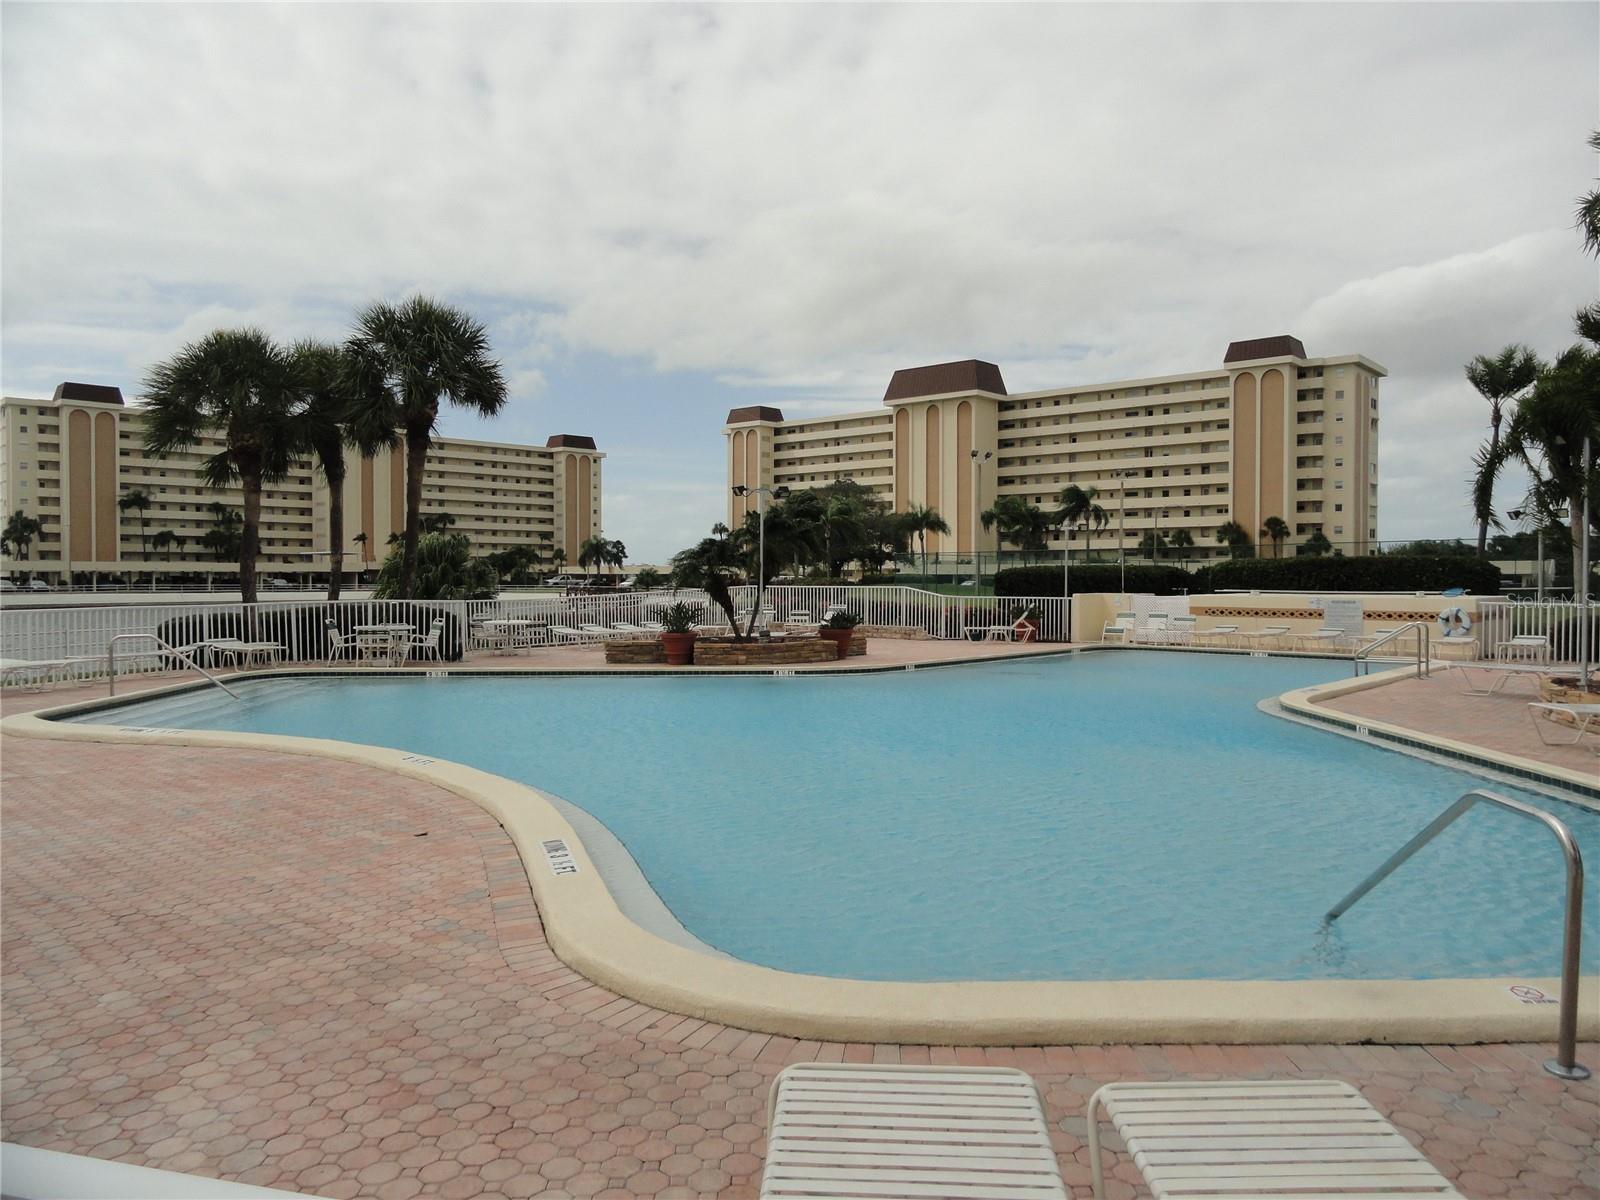 The main pool is close to the unit.